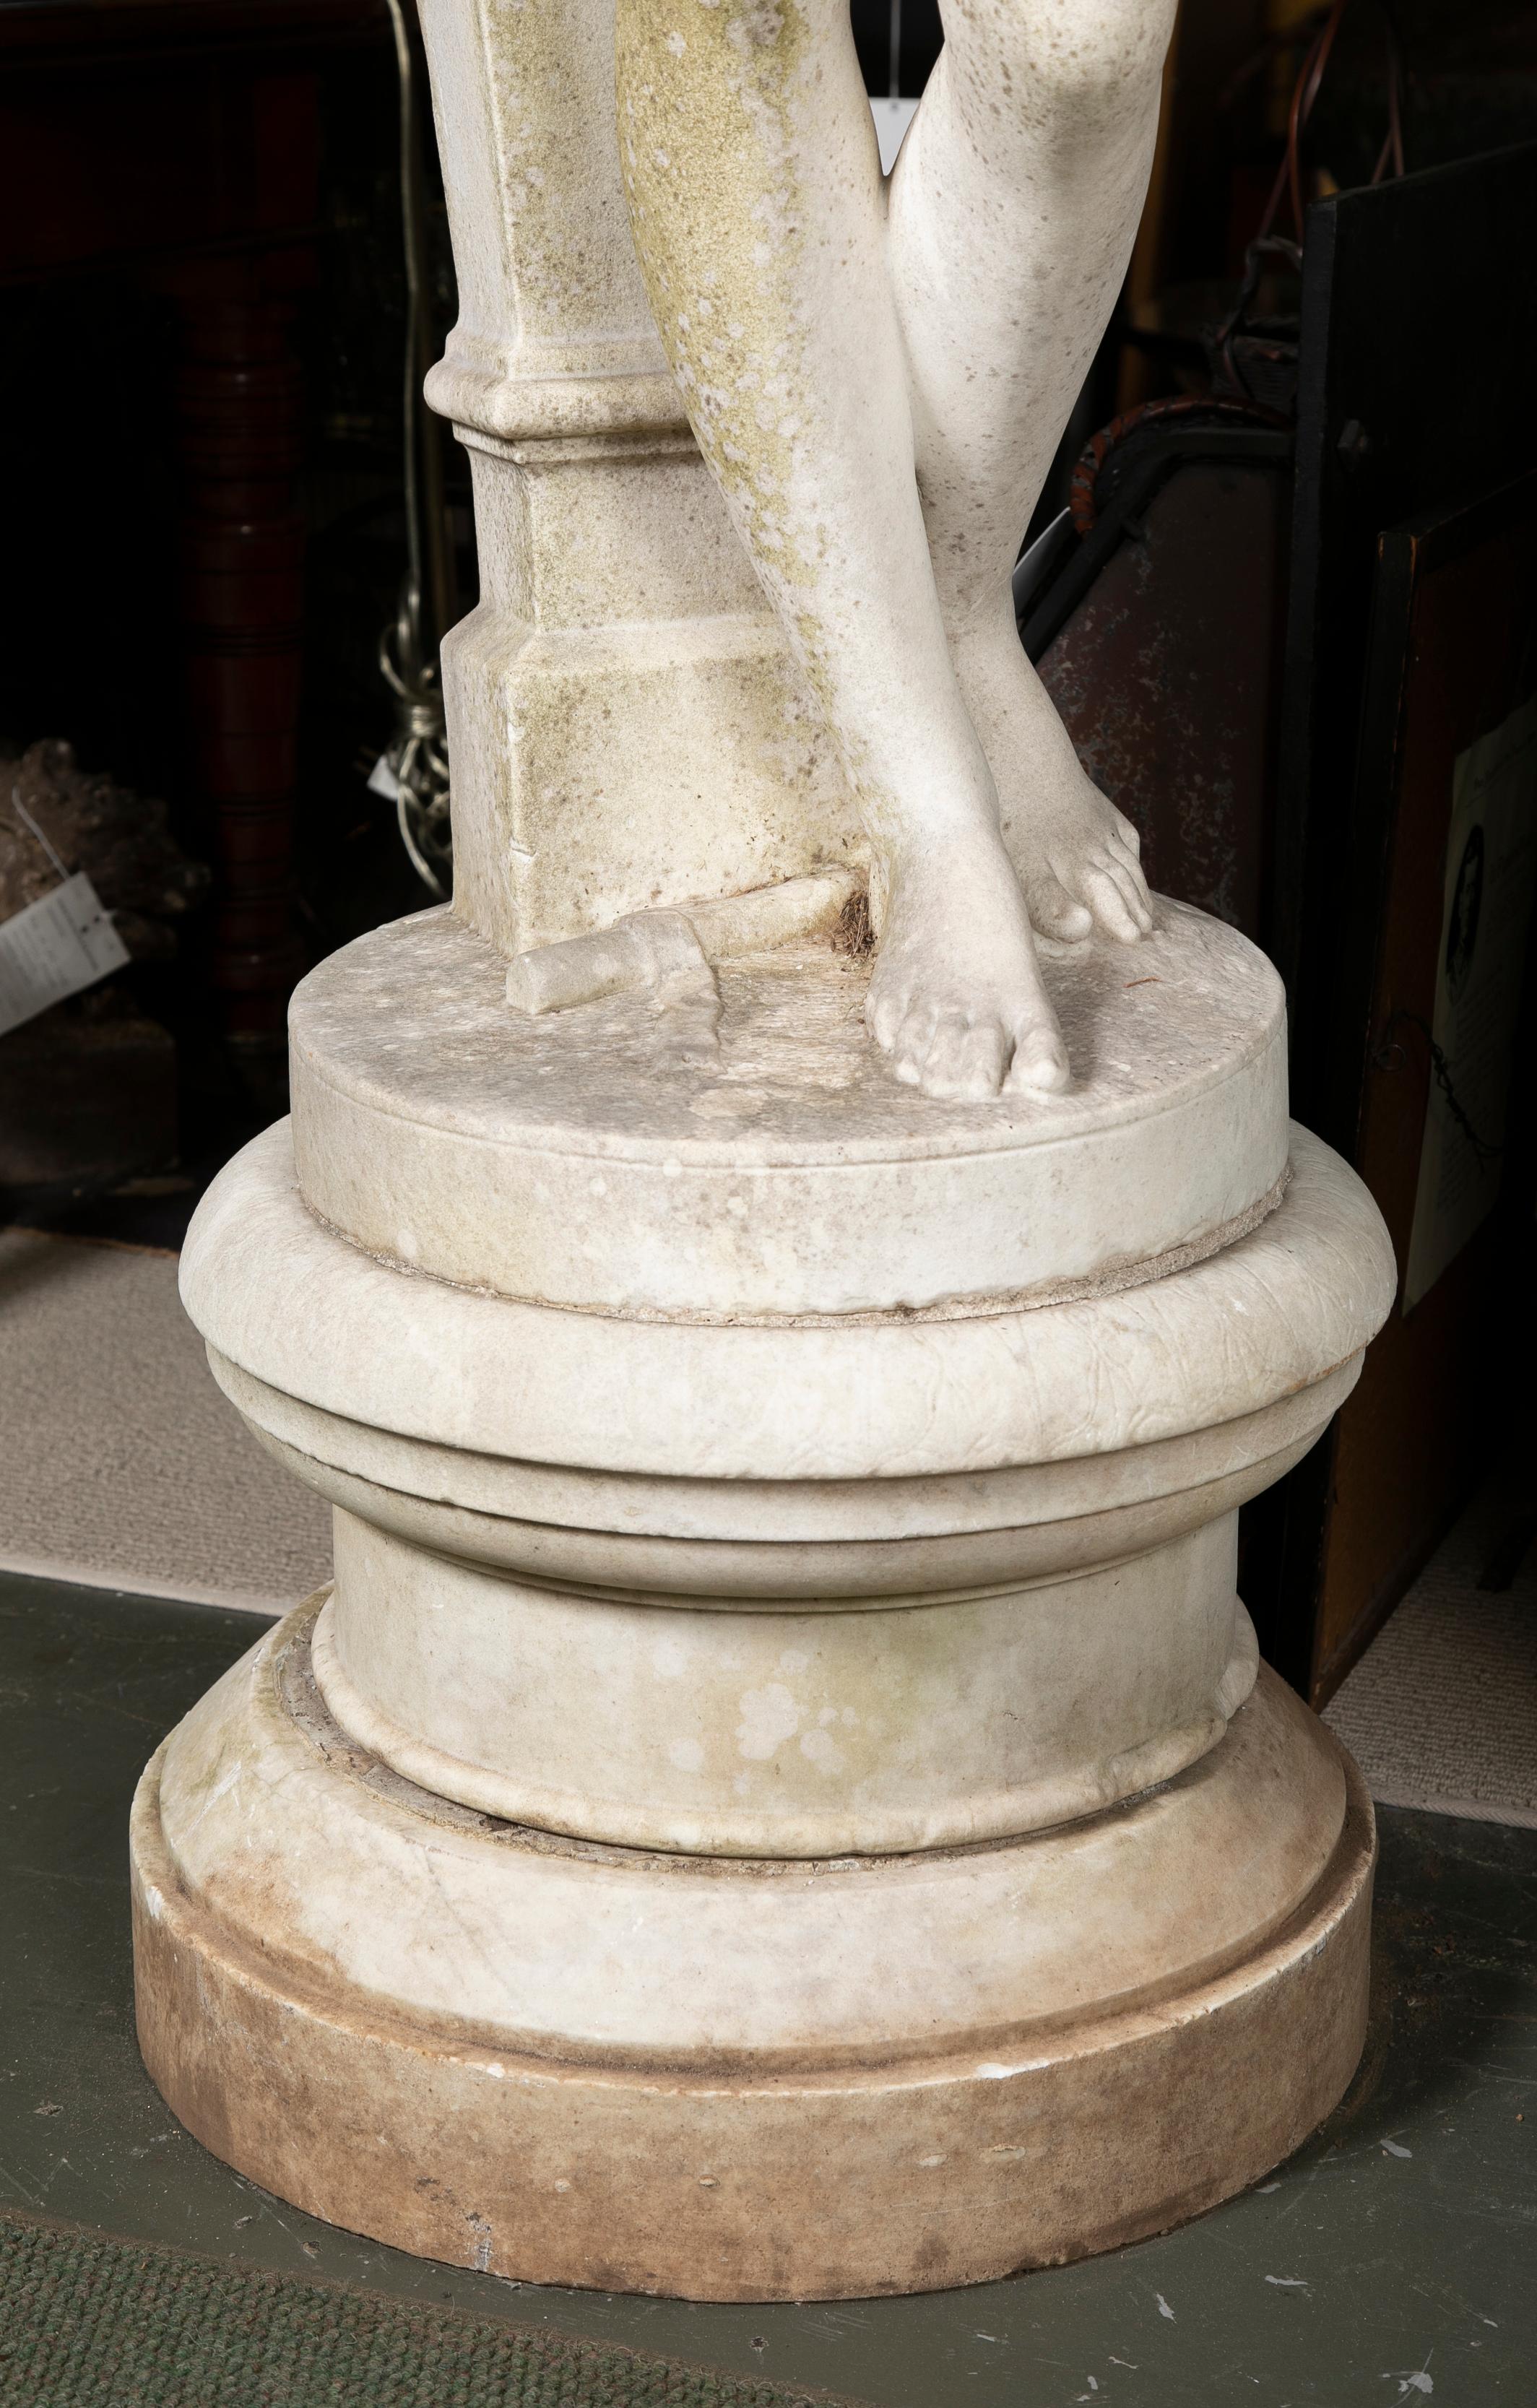 Carved Carrara marble statue of a satyr & maiden on marble plinth from a Black Rock, CT estate on the water. Italian.